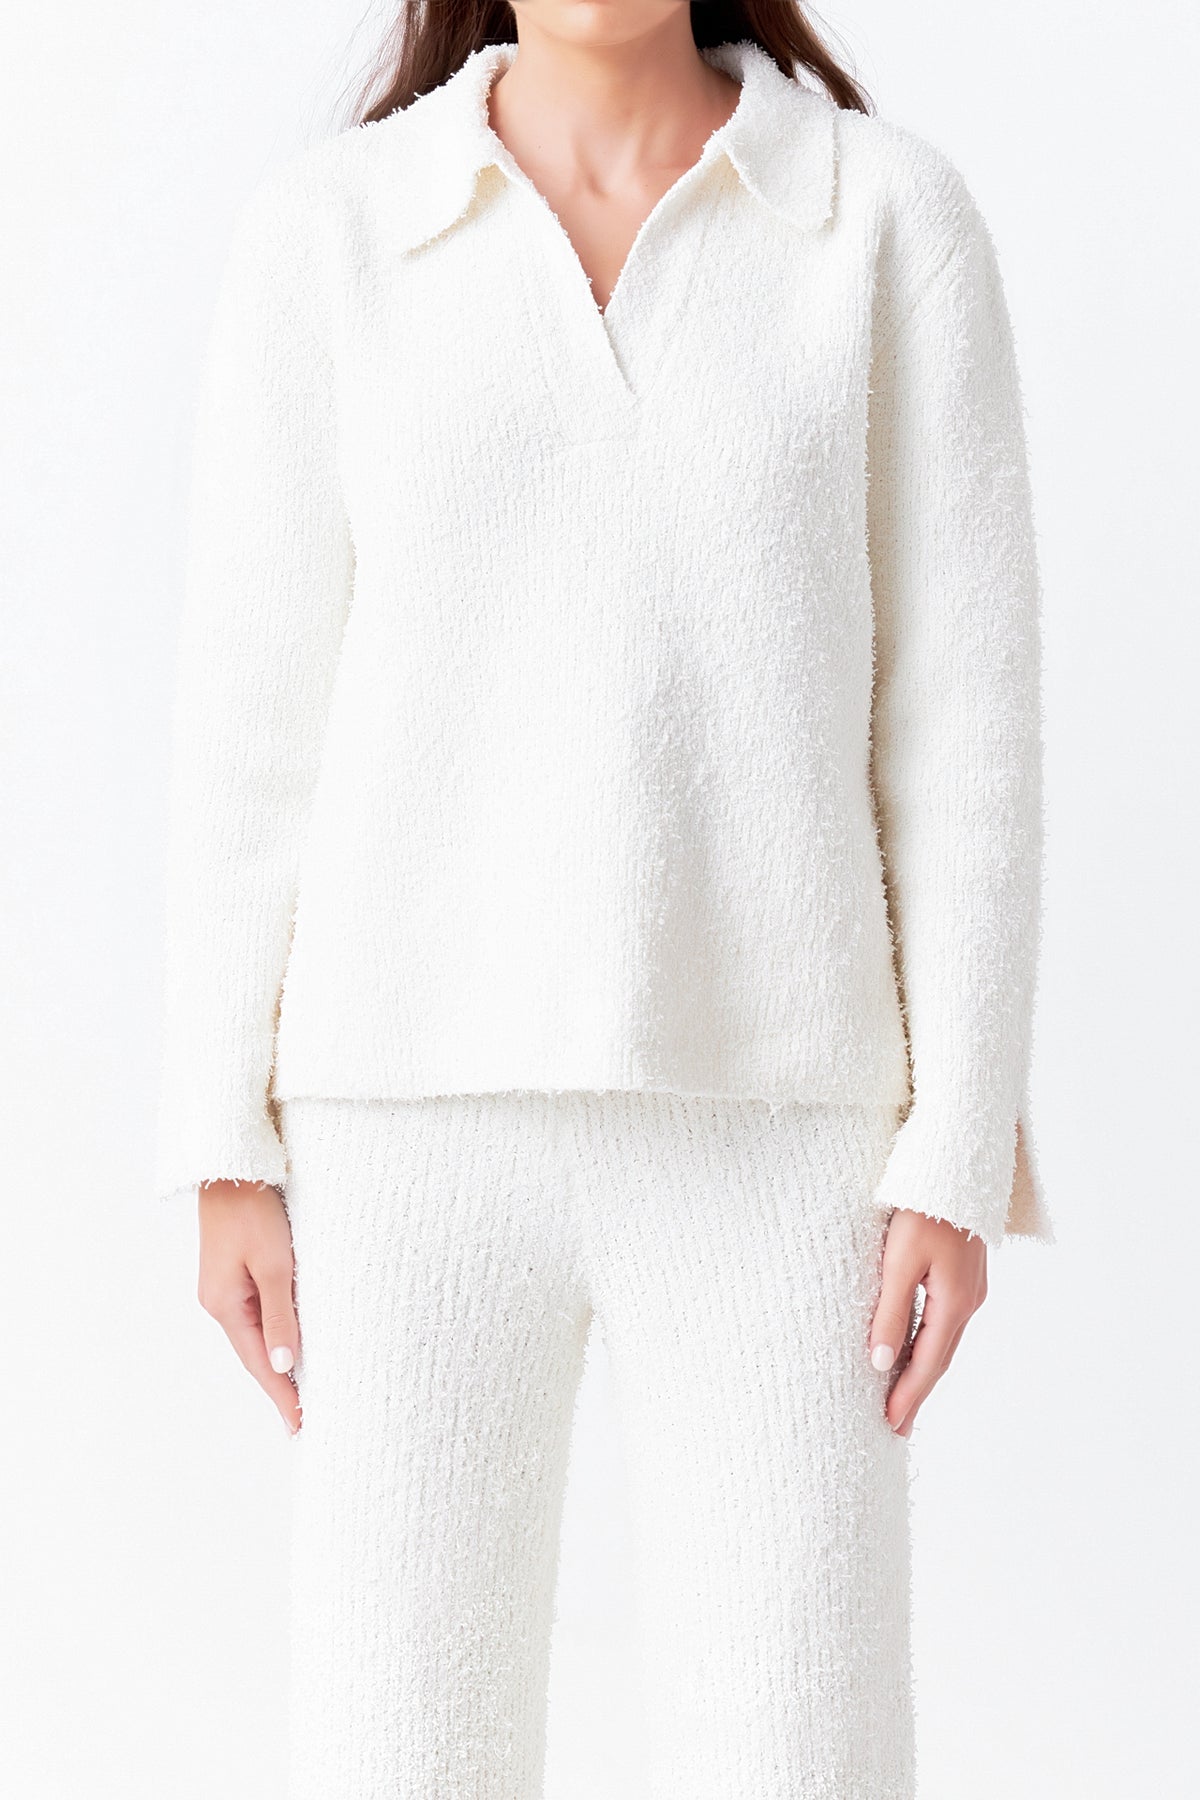 Textured Fuzzy Collared Sweater